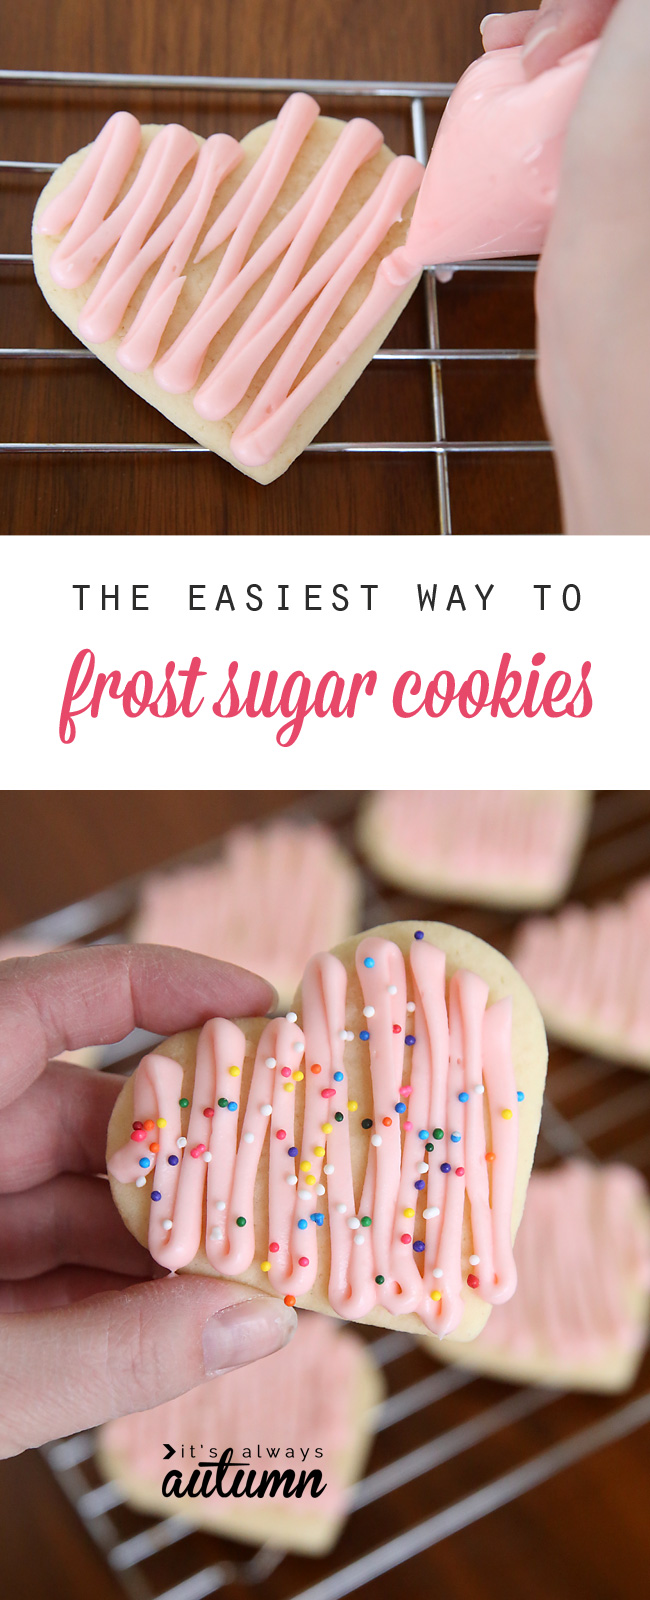 Great tip! You can frost a whole batch of sugar cookies in no time with this simple method (and all you need is a plastic sandwich bag!).